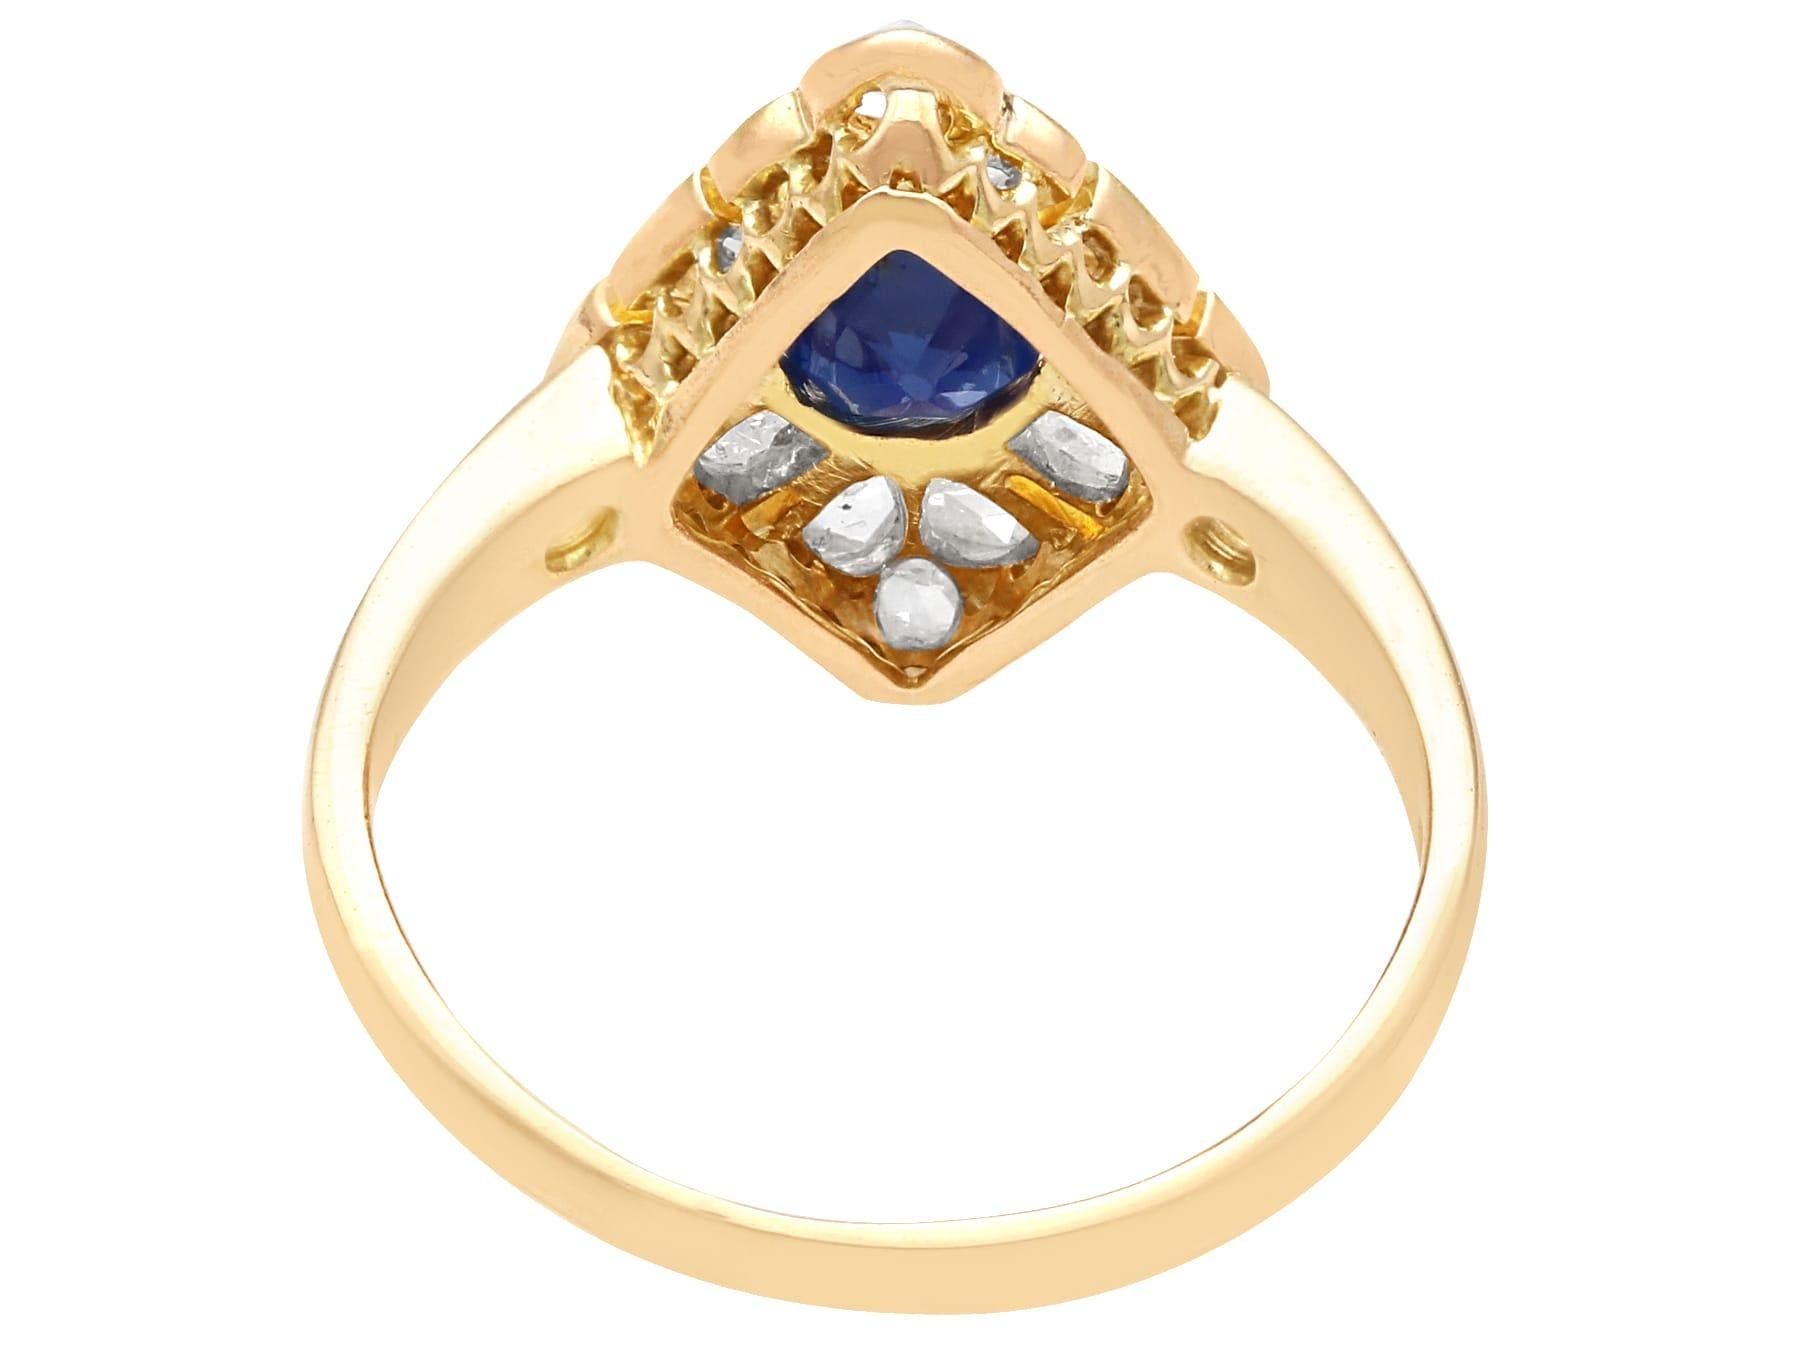 Antique 0.85ct Sapphire and 0.62ct Diamond 14k Yellow Gold Marquise Ring  In Excellent Condition For Sale In Jesmond, Newcastle Upon Tyne